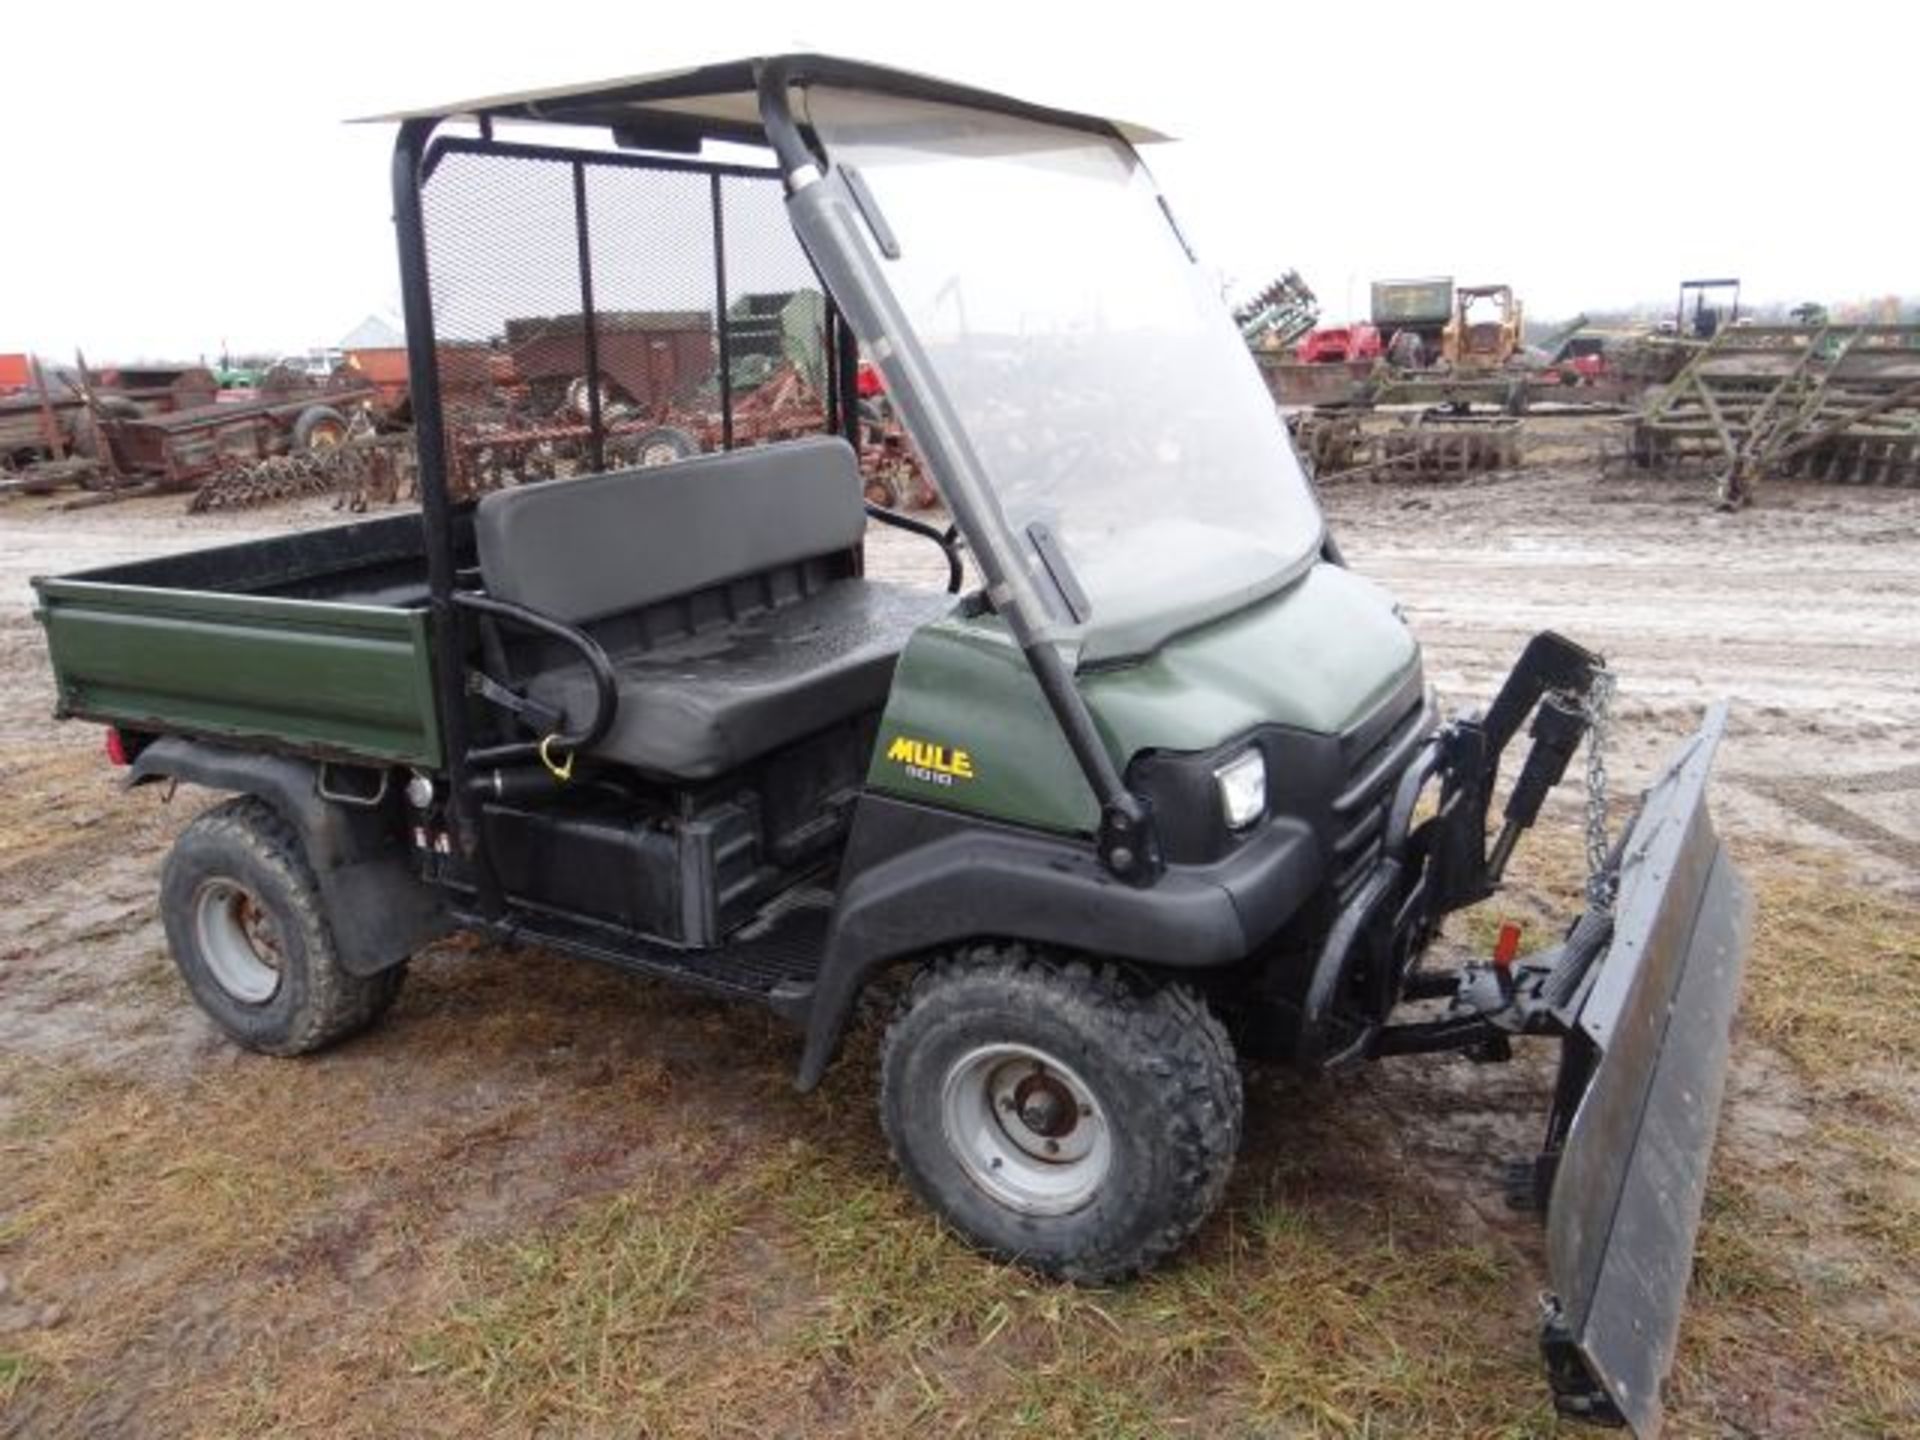 Kawasaki 3010 Mule, 2007 #112654, 960 hrs, Snow Blade, Power Lift, 4wd, Poly Windshield and Roof - Image 2 of 3